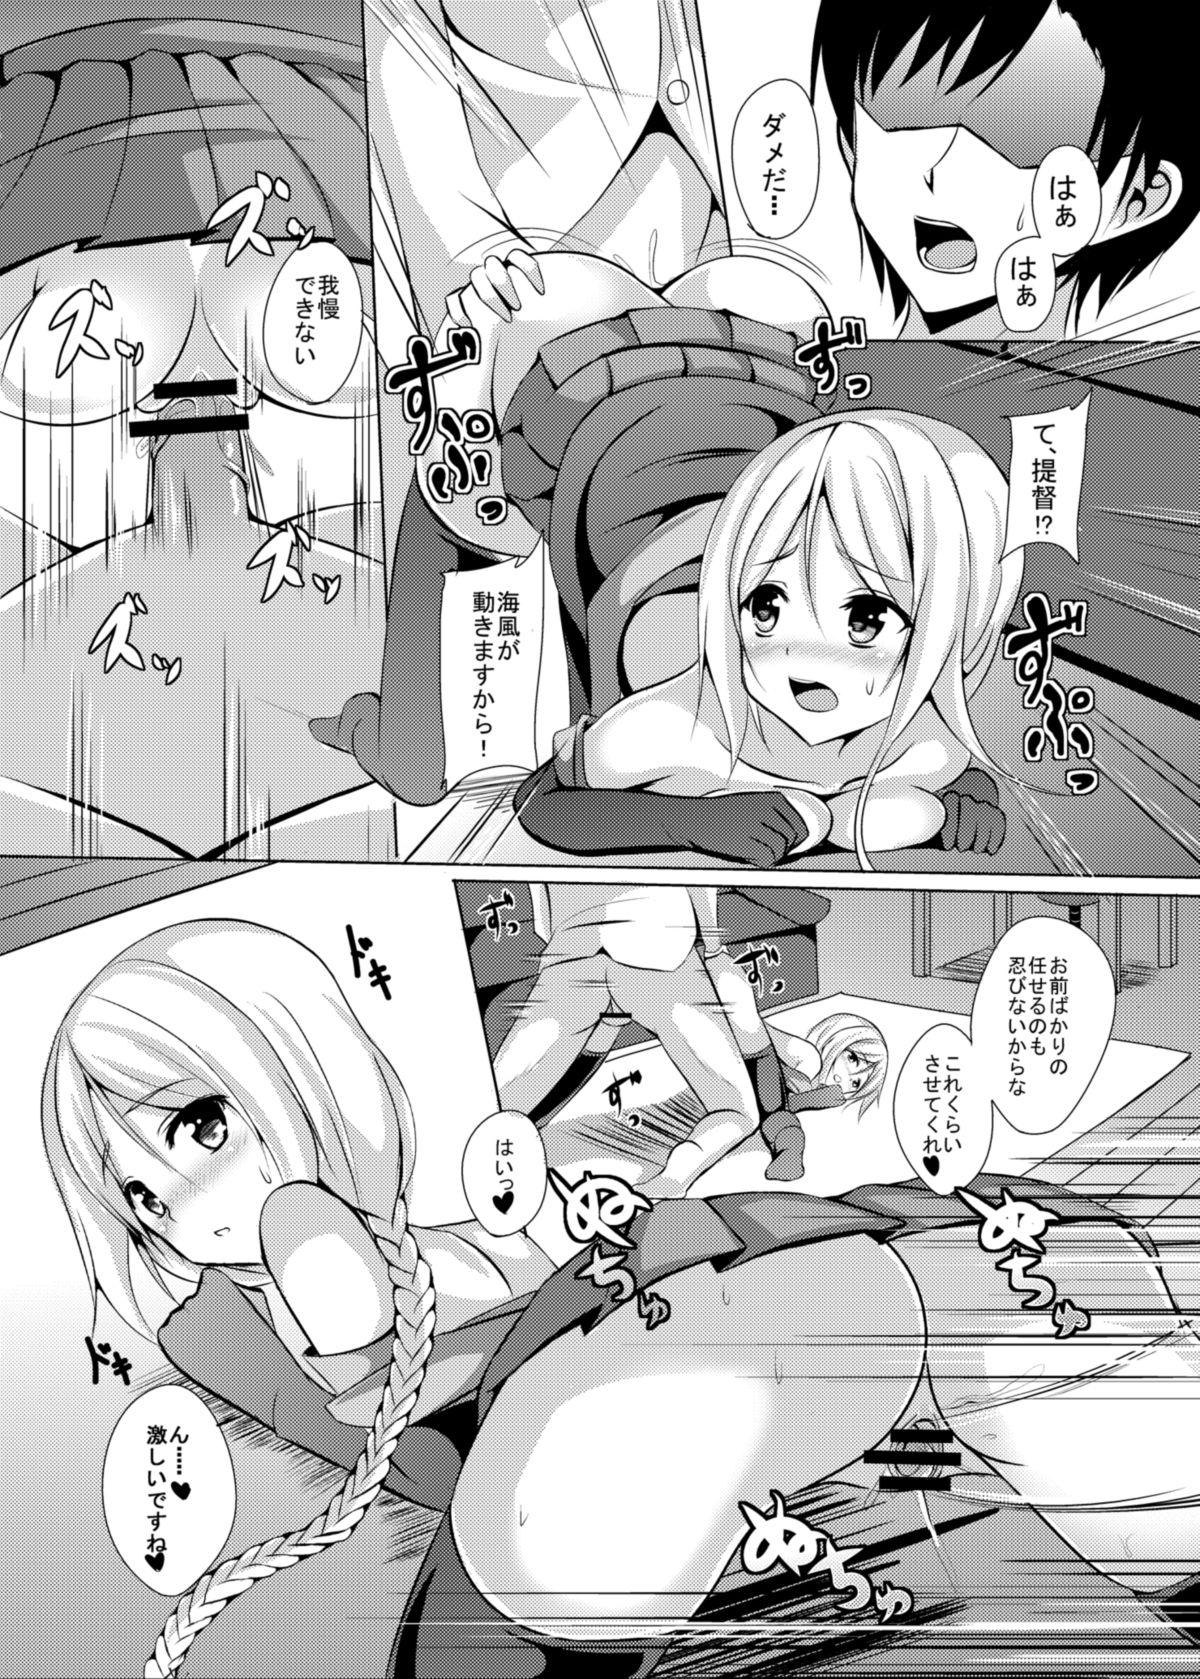 Dad 海風、頑張ります！ - Kantai collection Tanned - Page 8